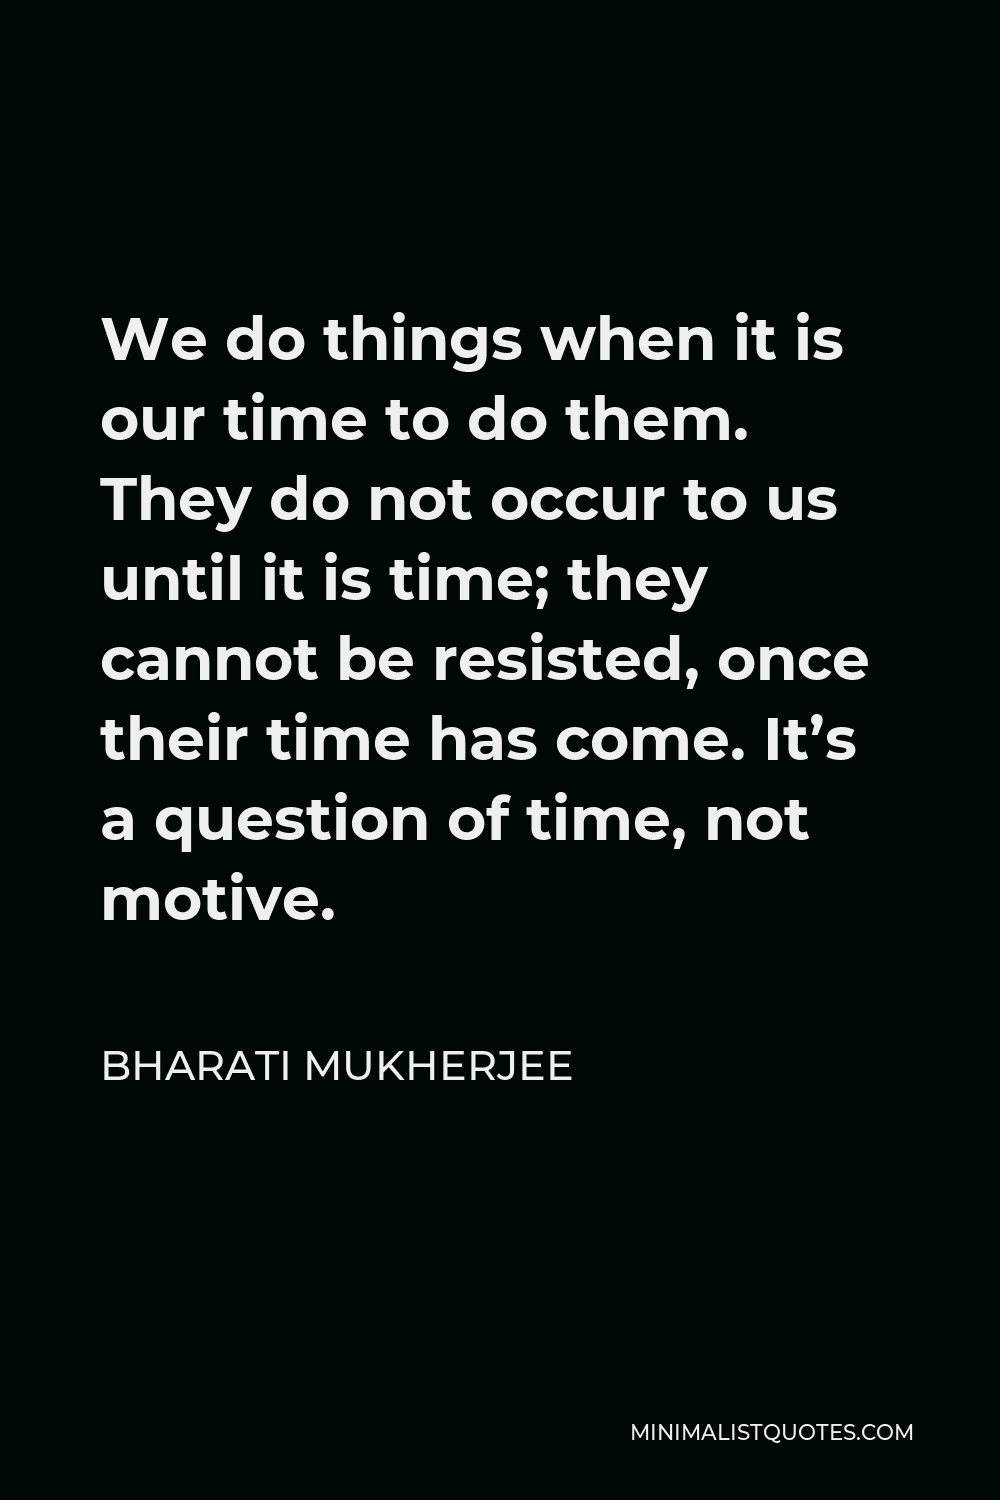 Bharati Mukherjee Quote - We do things when it is our time to do them. They do not occur to us until it is time; they cannot be resisted, once their time has come. It’s a question of time, not motive.